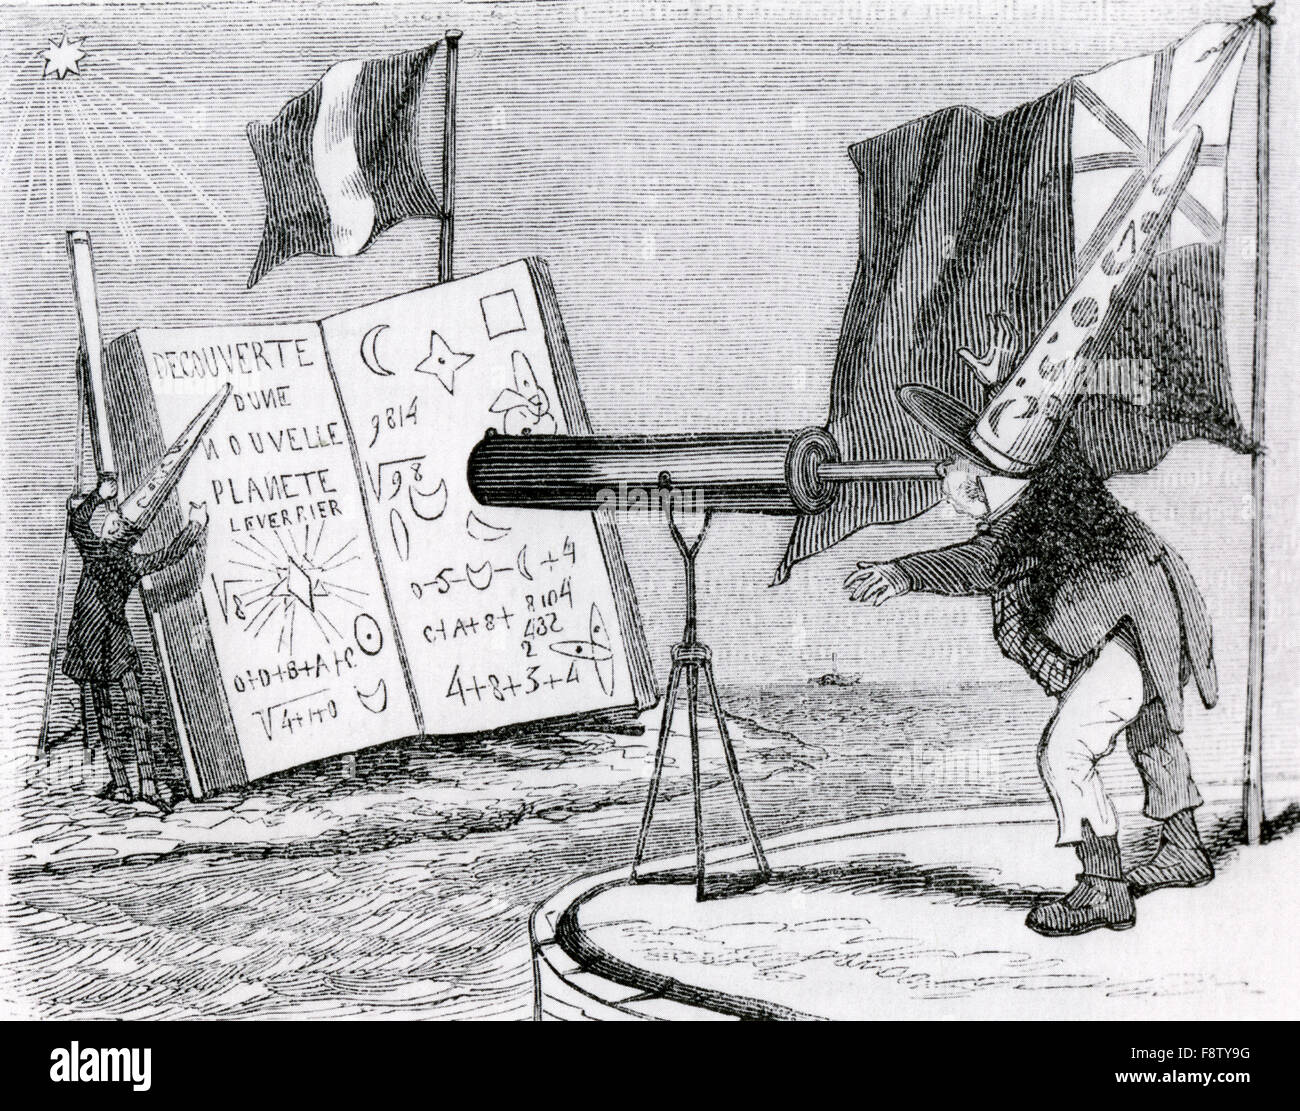 URBAIN LE VERRIER (1811-1877)  Engraving from French magazine L'Illustration in 1846 satirising English astronomer John Couch Adams at right using a telescope to read the announcement of Le Verrie's discovery  of Neptune which he disputed. Le Verrie shown at left observing the plant. Stock Photo